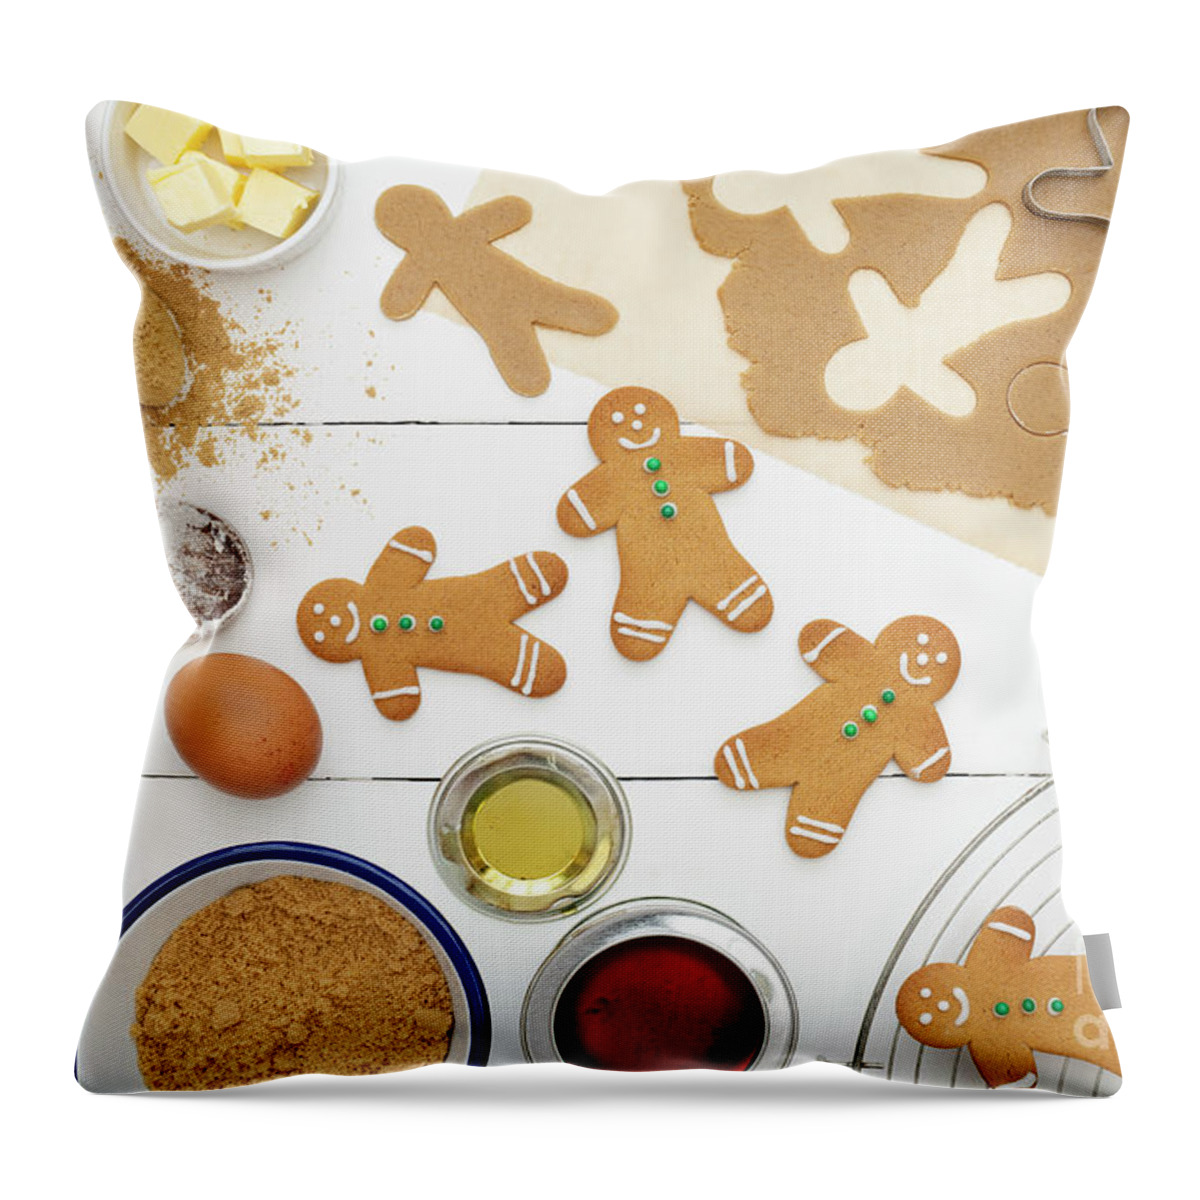 Gingerbread Men Throw Pillow featuring the photograph Gingerbread Baking by Tim Gainey